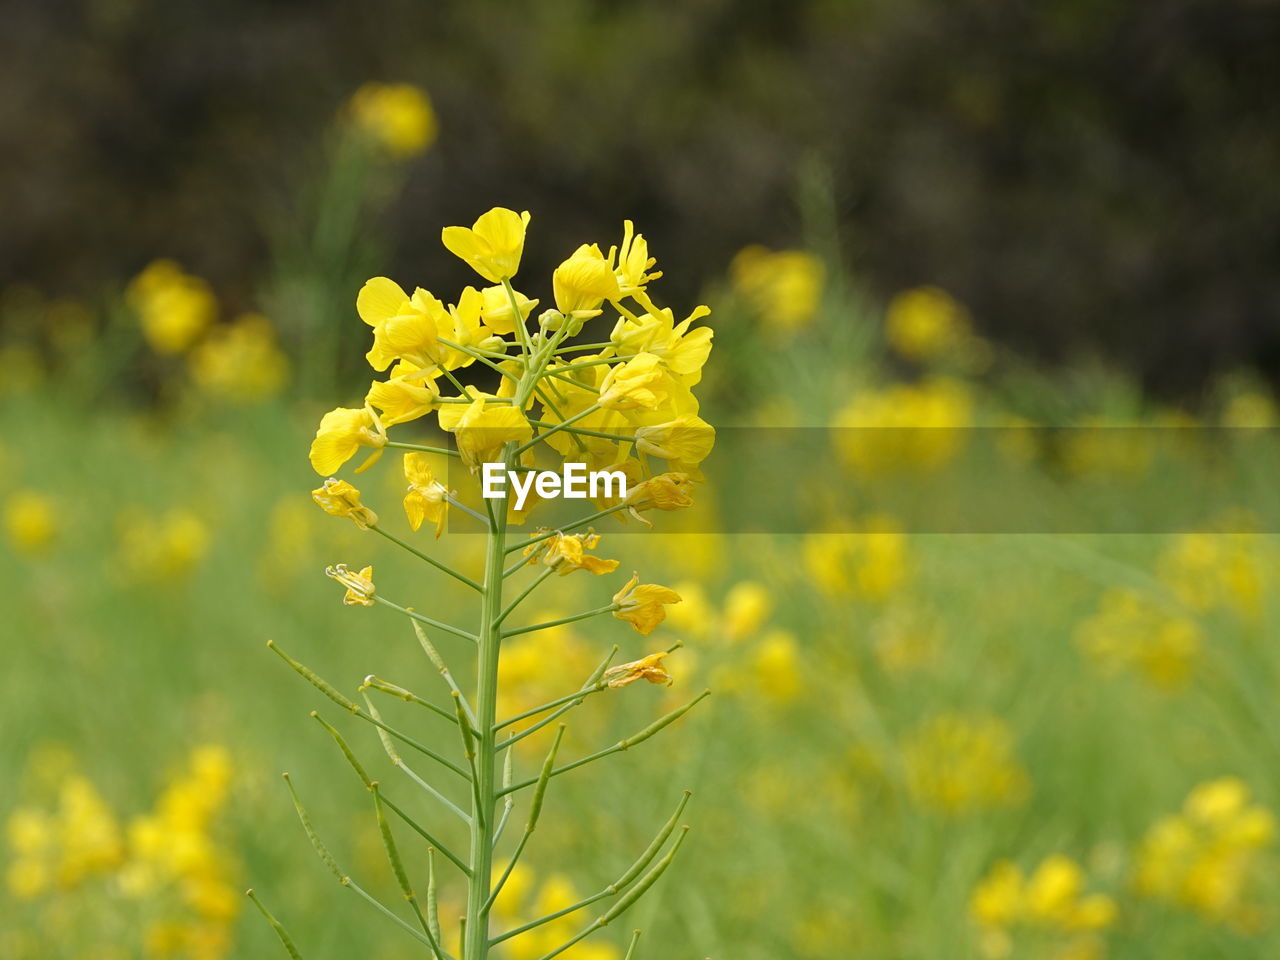 plant, yellow, flower, rapeseed, flowering plant, beauty in nature, produce, freshness, mustard, vegetable, canola, food, nature, growth, field, brassica rapa, landscape, agriculture, rural scene, land, springtime, oilseed rape, environment, meadow, prairie, close-up, focus on foreground, fragility, no people, blossom, crop, outdoors, flower head, summer, vibrant color, day, selective focus, farm, plain, green, botany, tranquility, wildflower, food and drink, scenics - nature, sunlight